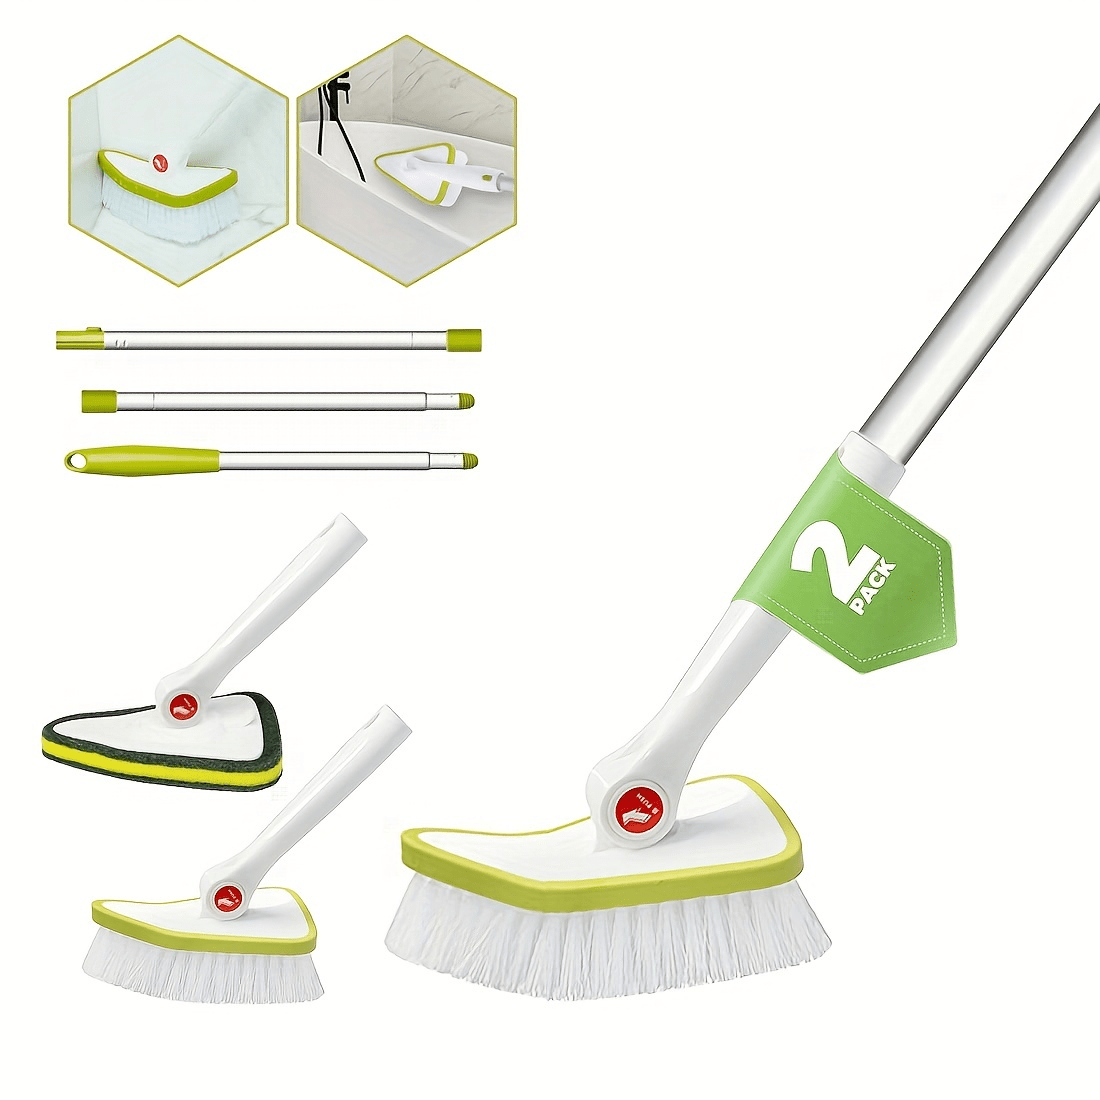 2 In 1 Cleaning Brush Tub And Tile Scrubber Brush Sponge With 46 Extendable Long Lightweight Handle Detachable Stiff Bristl White One-pole Double-headed Suit